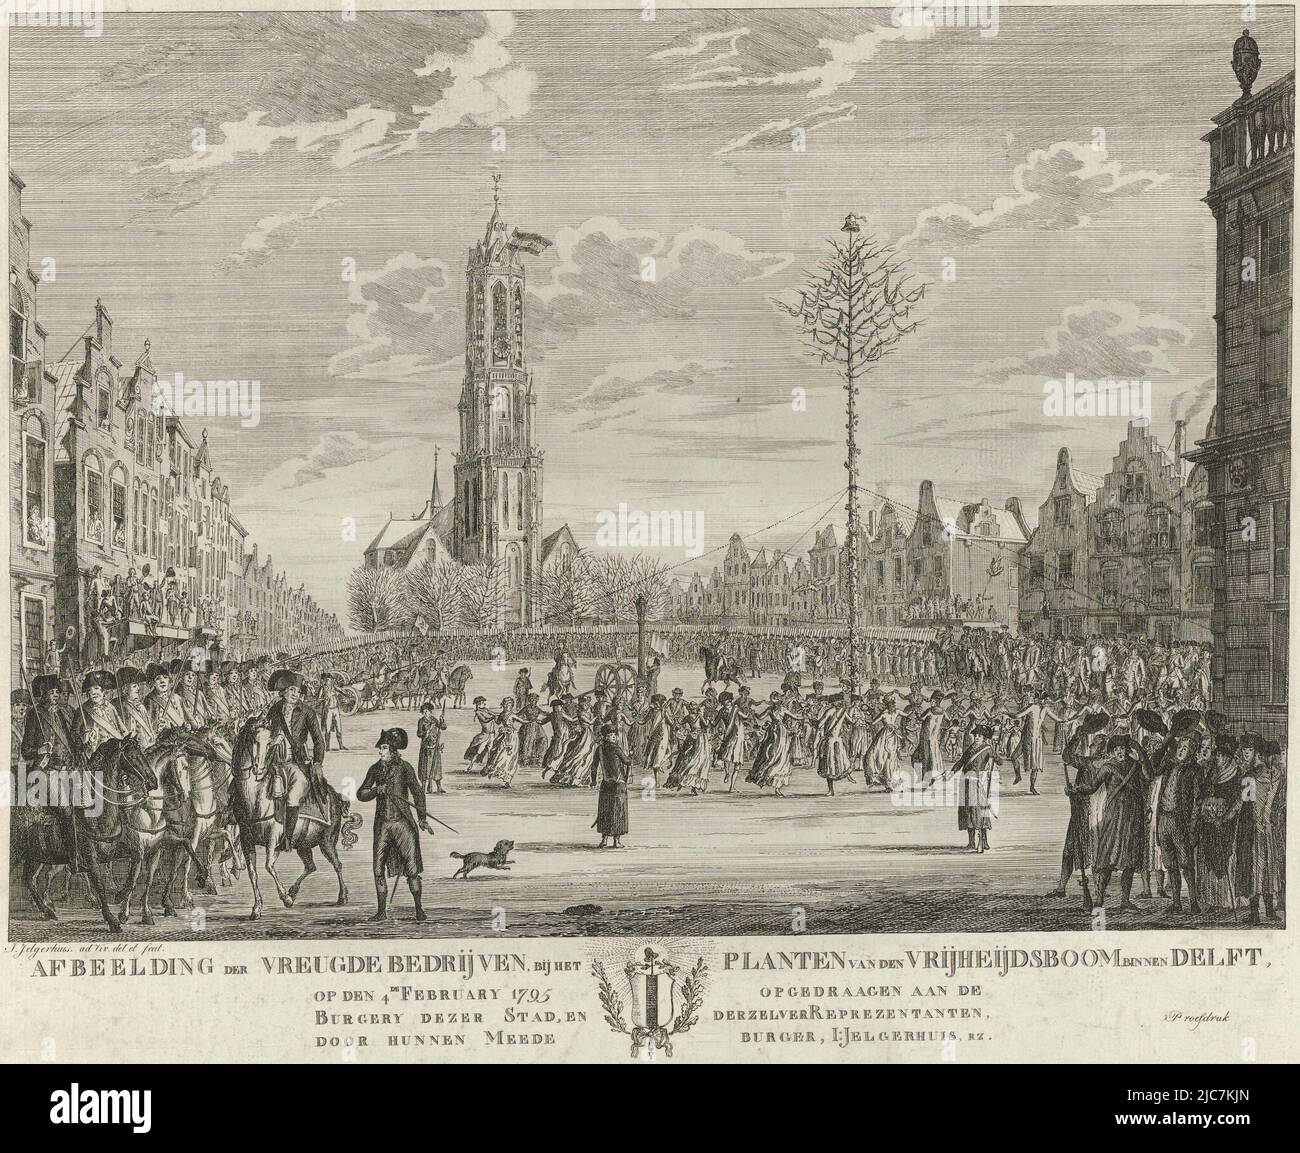 Men and women dancing around the tree of liberty placed in front of the town hall on the Grote Markt in Delft, 4 February 1795. Military personnel on horseback are lined up around the square. In the background the Nieuwe Kerk. See also the pendant, Planting the tree of liberty in Delft, 1795 Depiction of the Joy Companies, at the Planting of the Tree of Liberty within Delft, on the 4th of February 1795., print maker: Johannes Jelgerhuis, (mentioned on object), Johannes Jelgerhuis, (mentioned on object), burgerij van Delft, (mentioned on object), Northern Netherlands, 1795, paper, etching Stock Photo